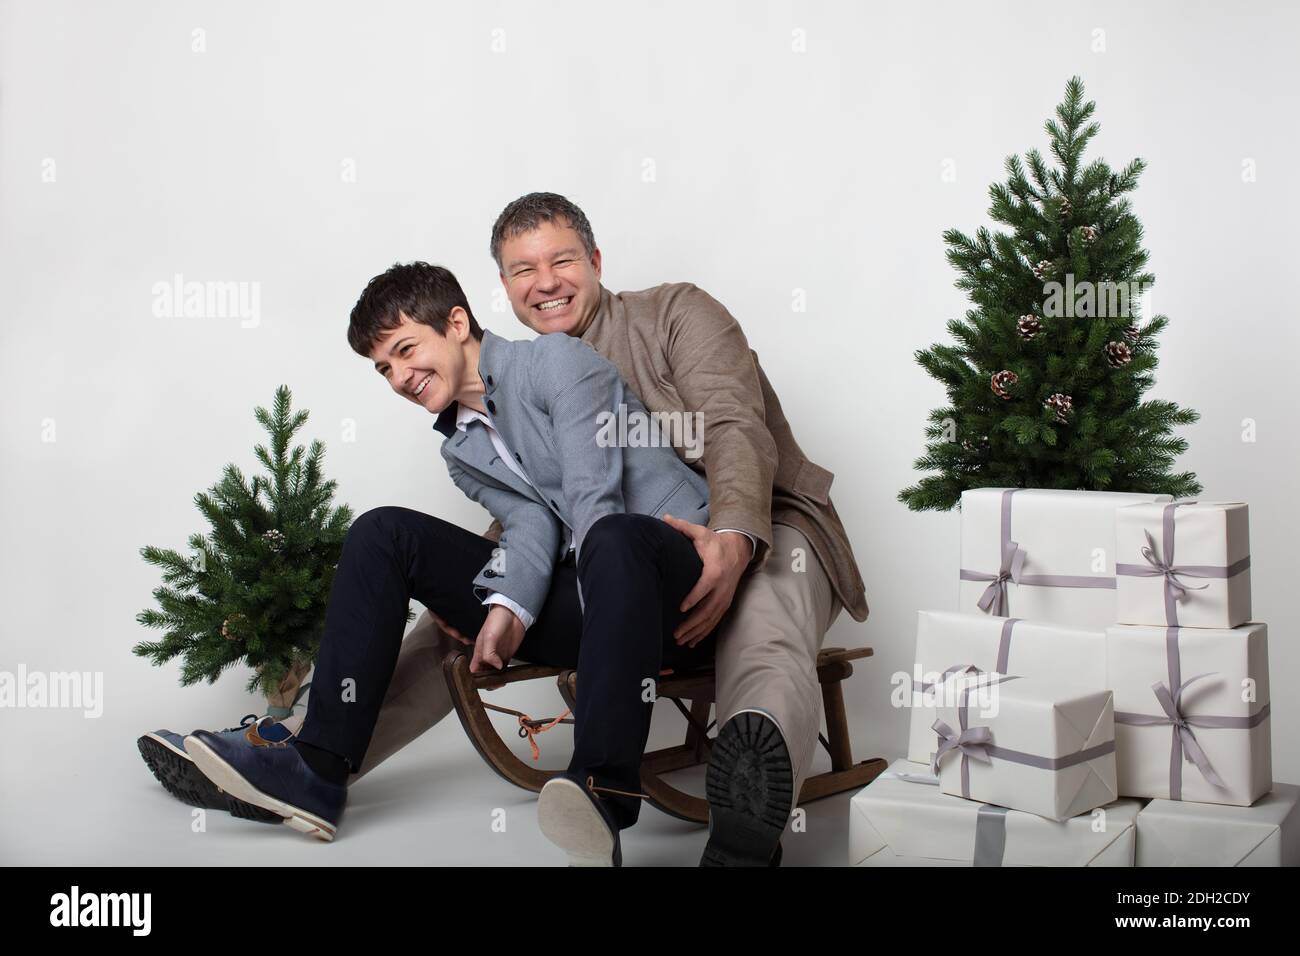 Christmas themed horizontal business couple portrait dressed smart casual in blue, white, beige pants and blazers on grey background. In the foreground a wooden sleigh with a pile of white gift boxes on it. Two miniature Christmas pine trees. Stock Photo